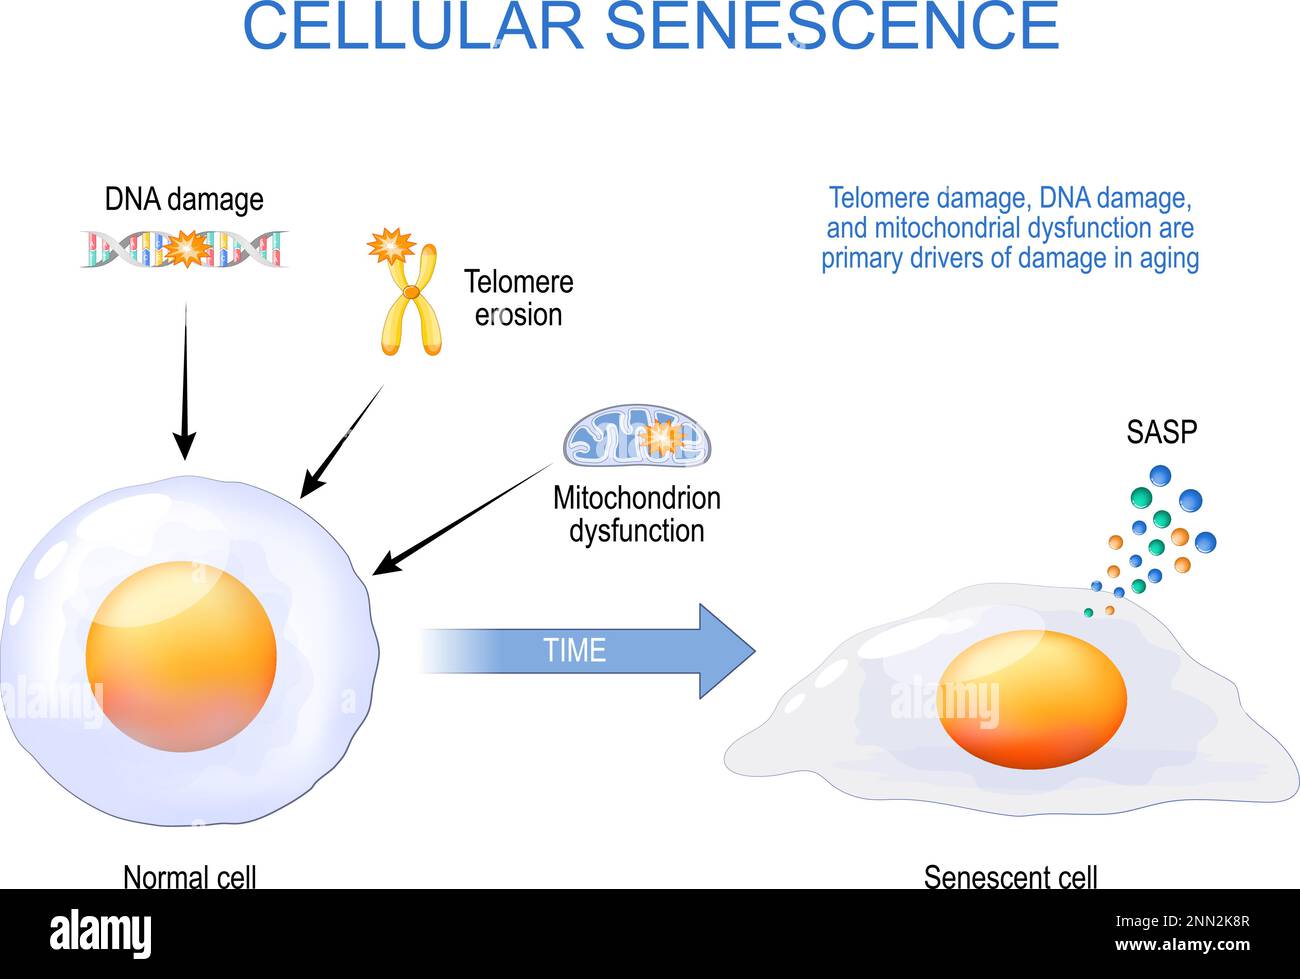 cellular senescence. From Normal to Senescent cell. Telomere and DNA damaged, mitochondrial dysfunction are primary drivers of damage in aging Stock Vector